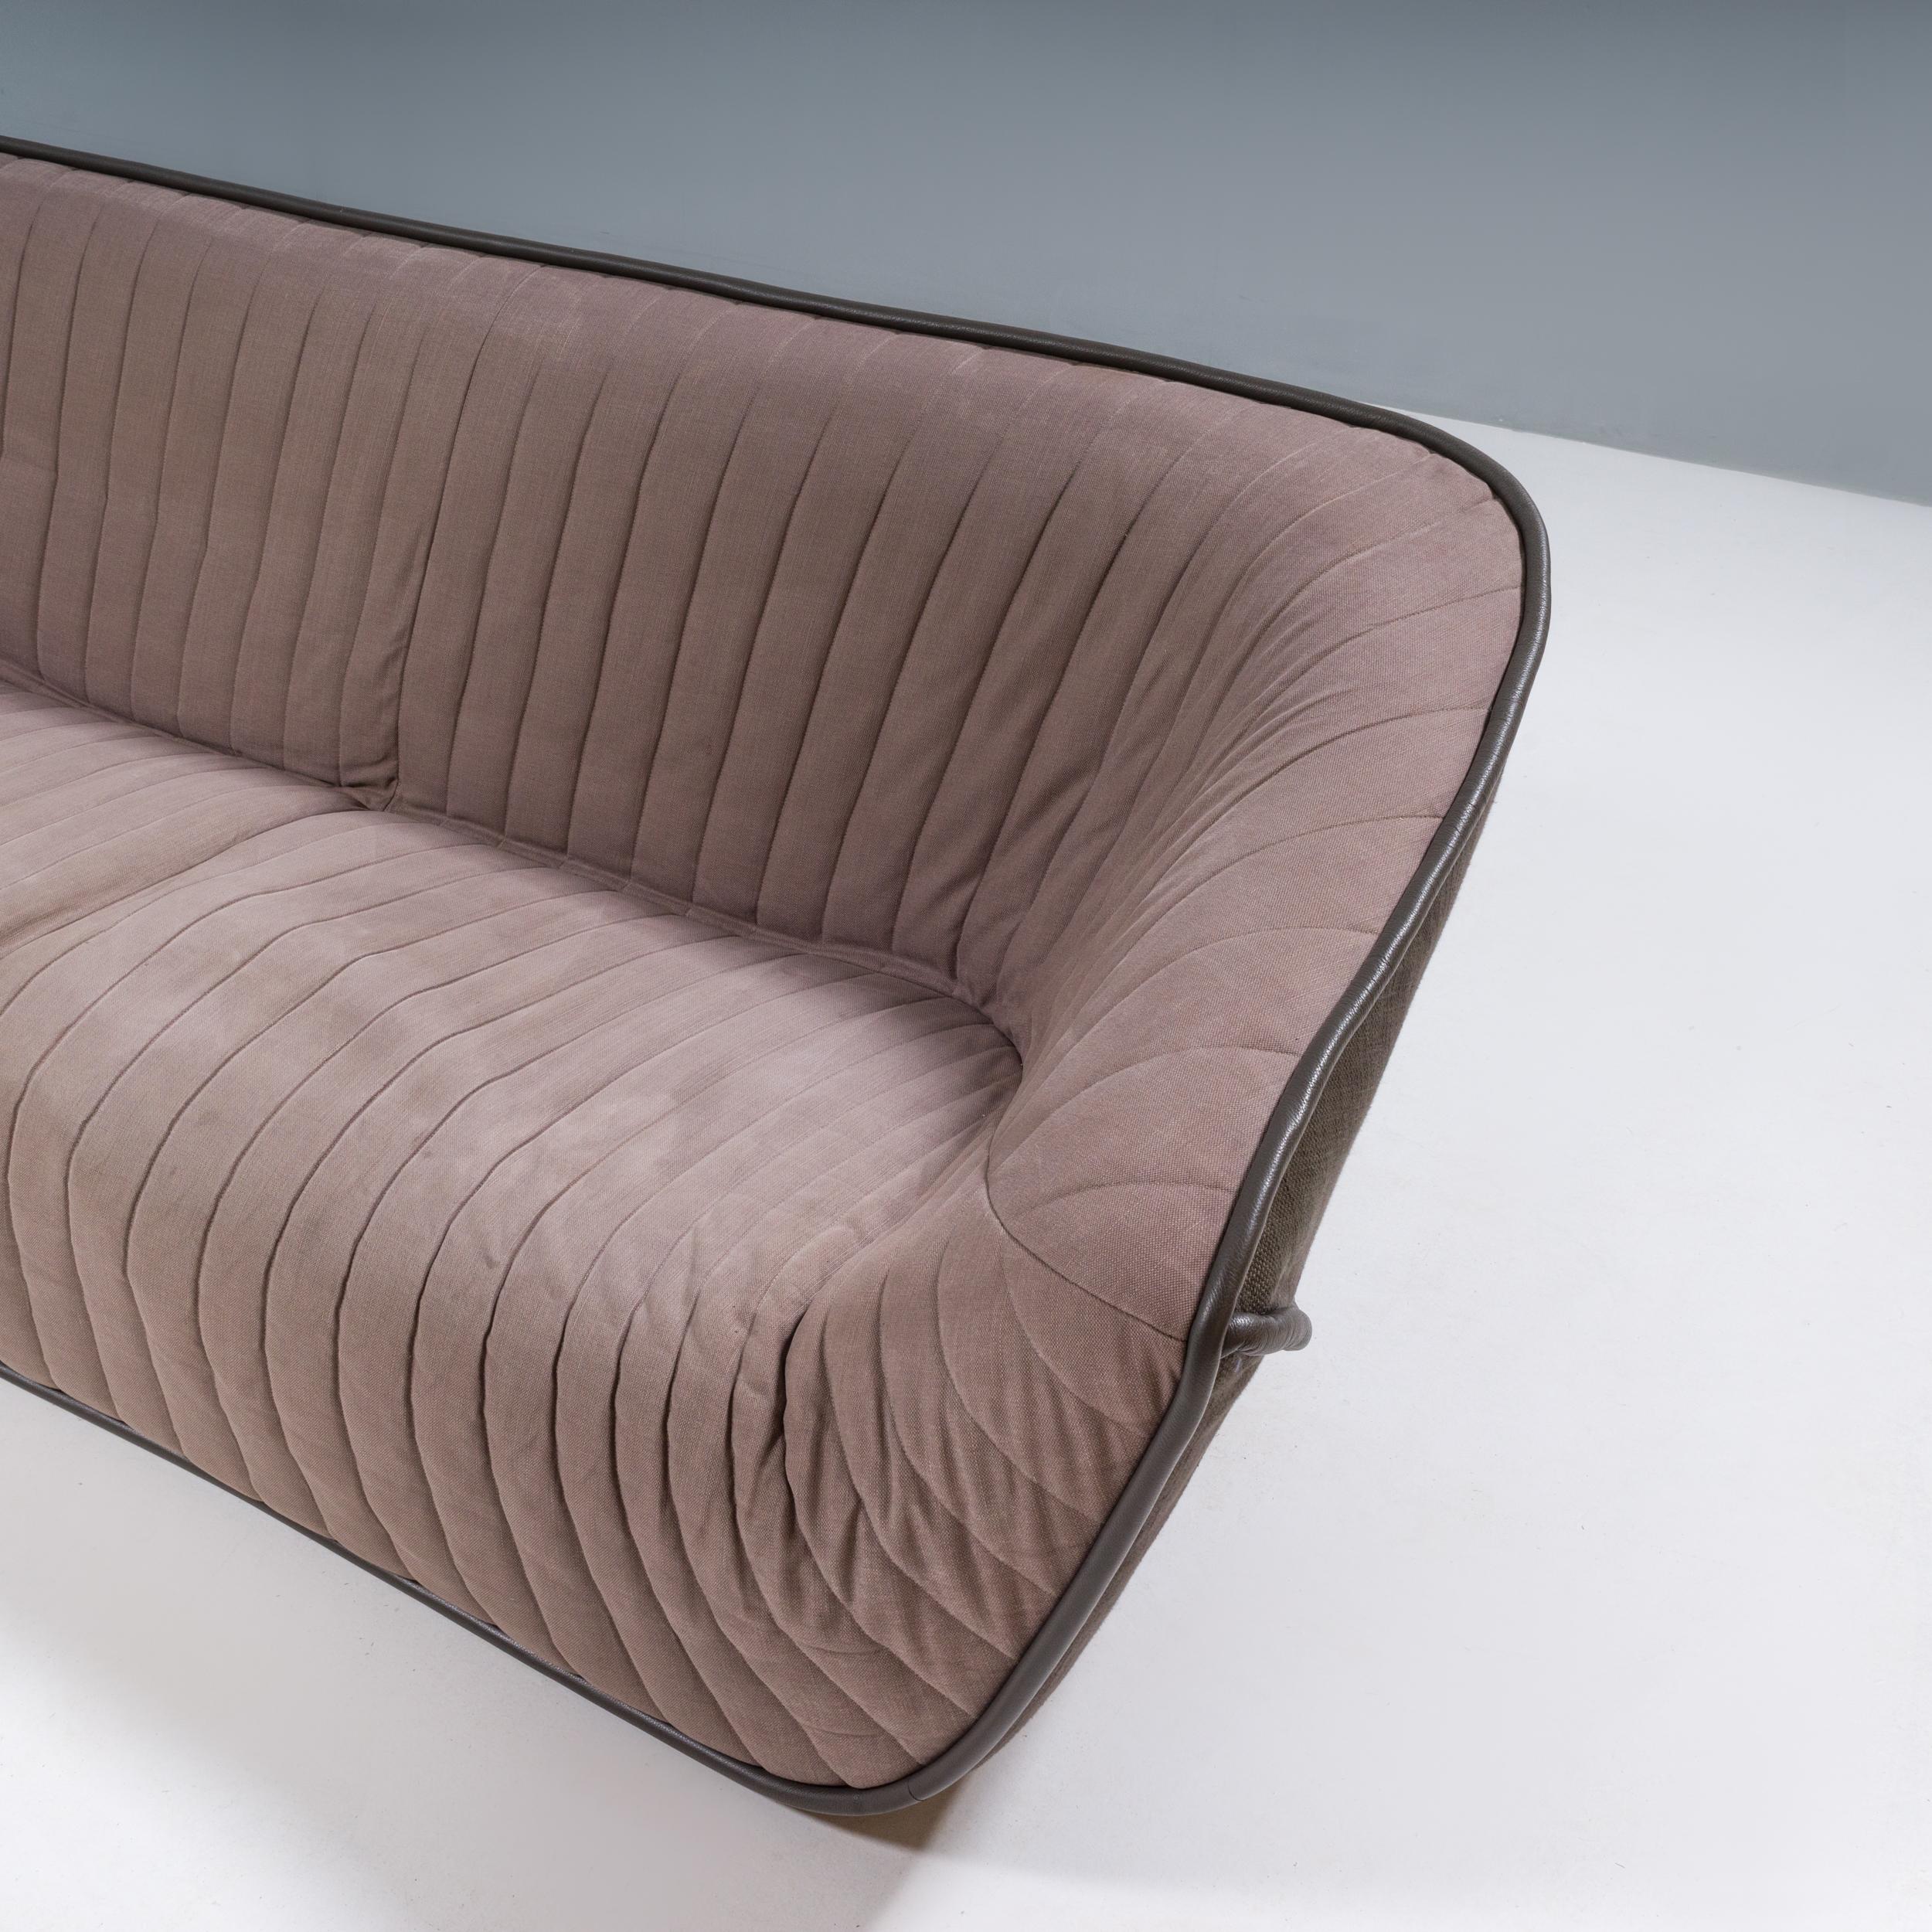 Originally designed by Cédric Ragot for Roche Bobois in 2013, the Nautil sofa gives a contemporary update to the iconic styles of the 1970s.

Constructed from a solid wood frame, the sofa has foam padding creating the enveloping shell-like